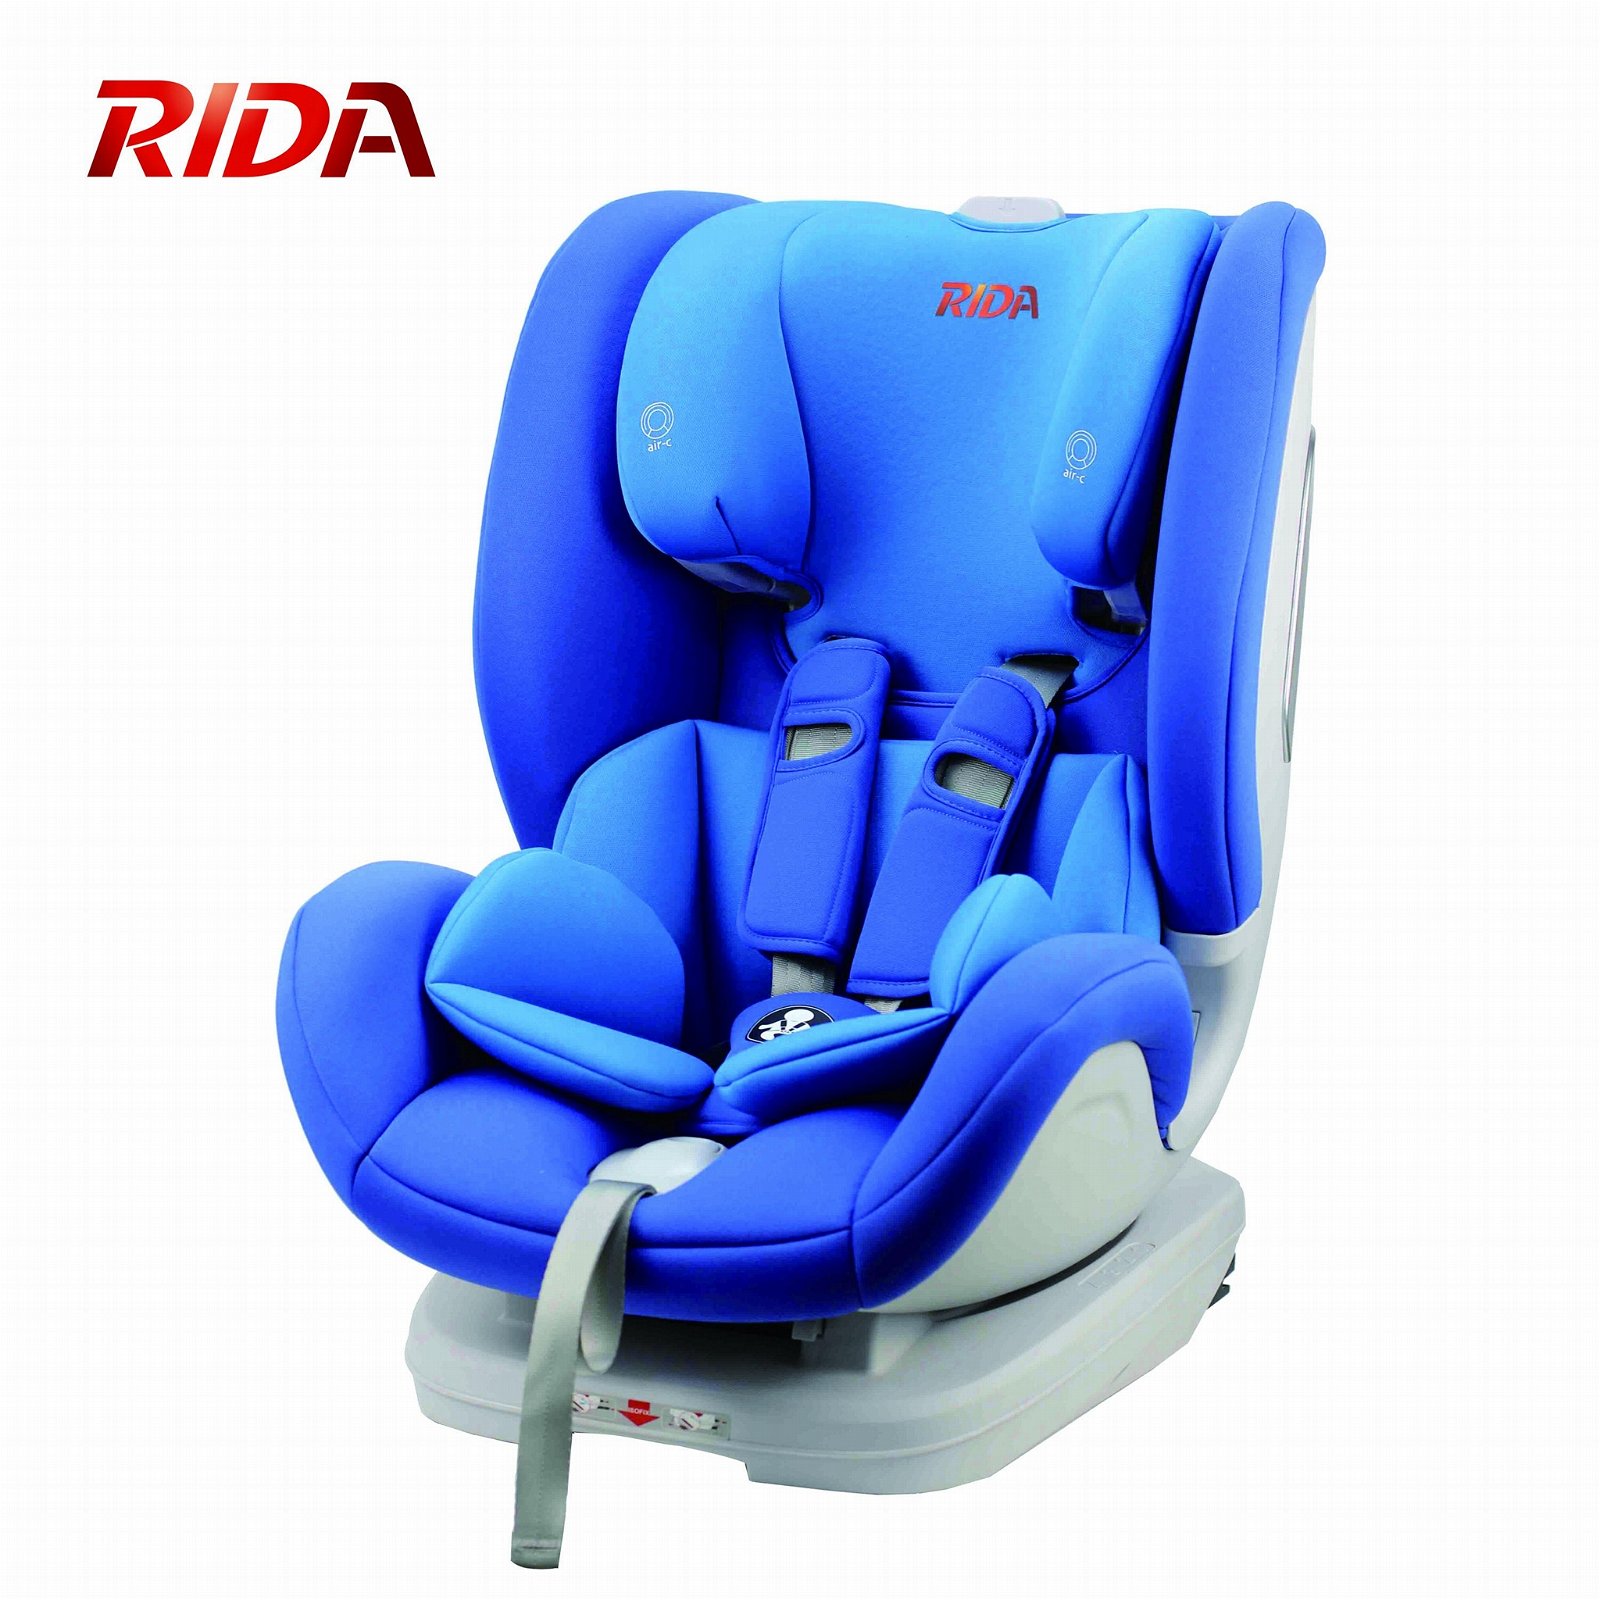 Washable Cover and ISOFIX Installation Child Safety Car Seat 